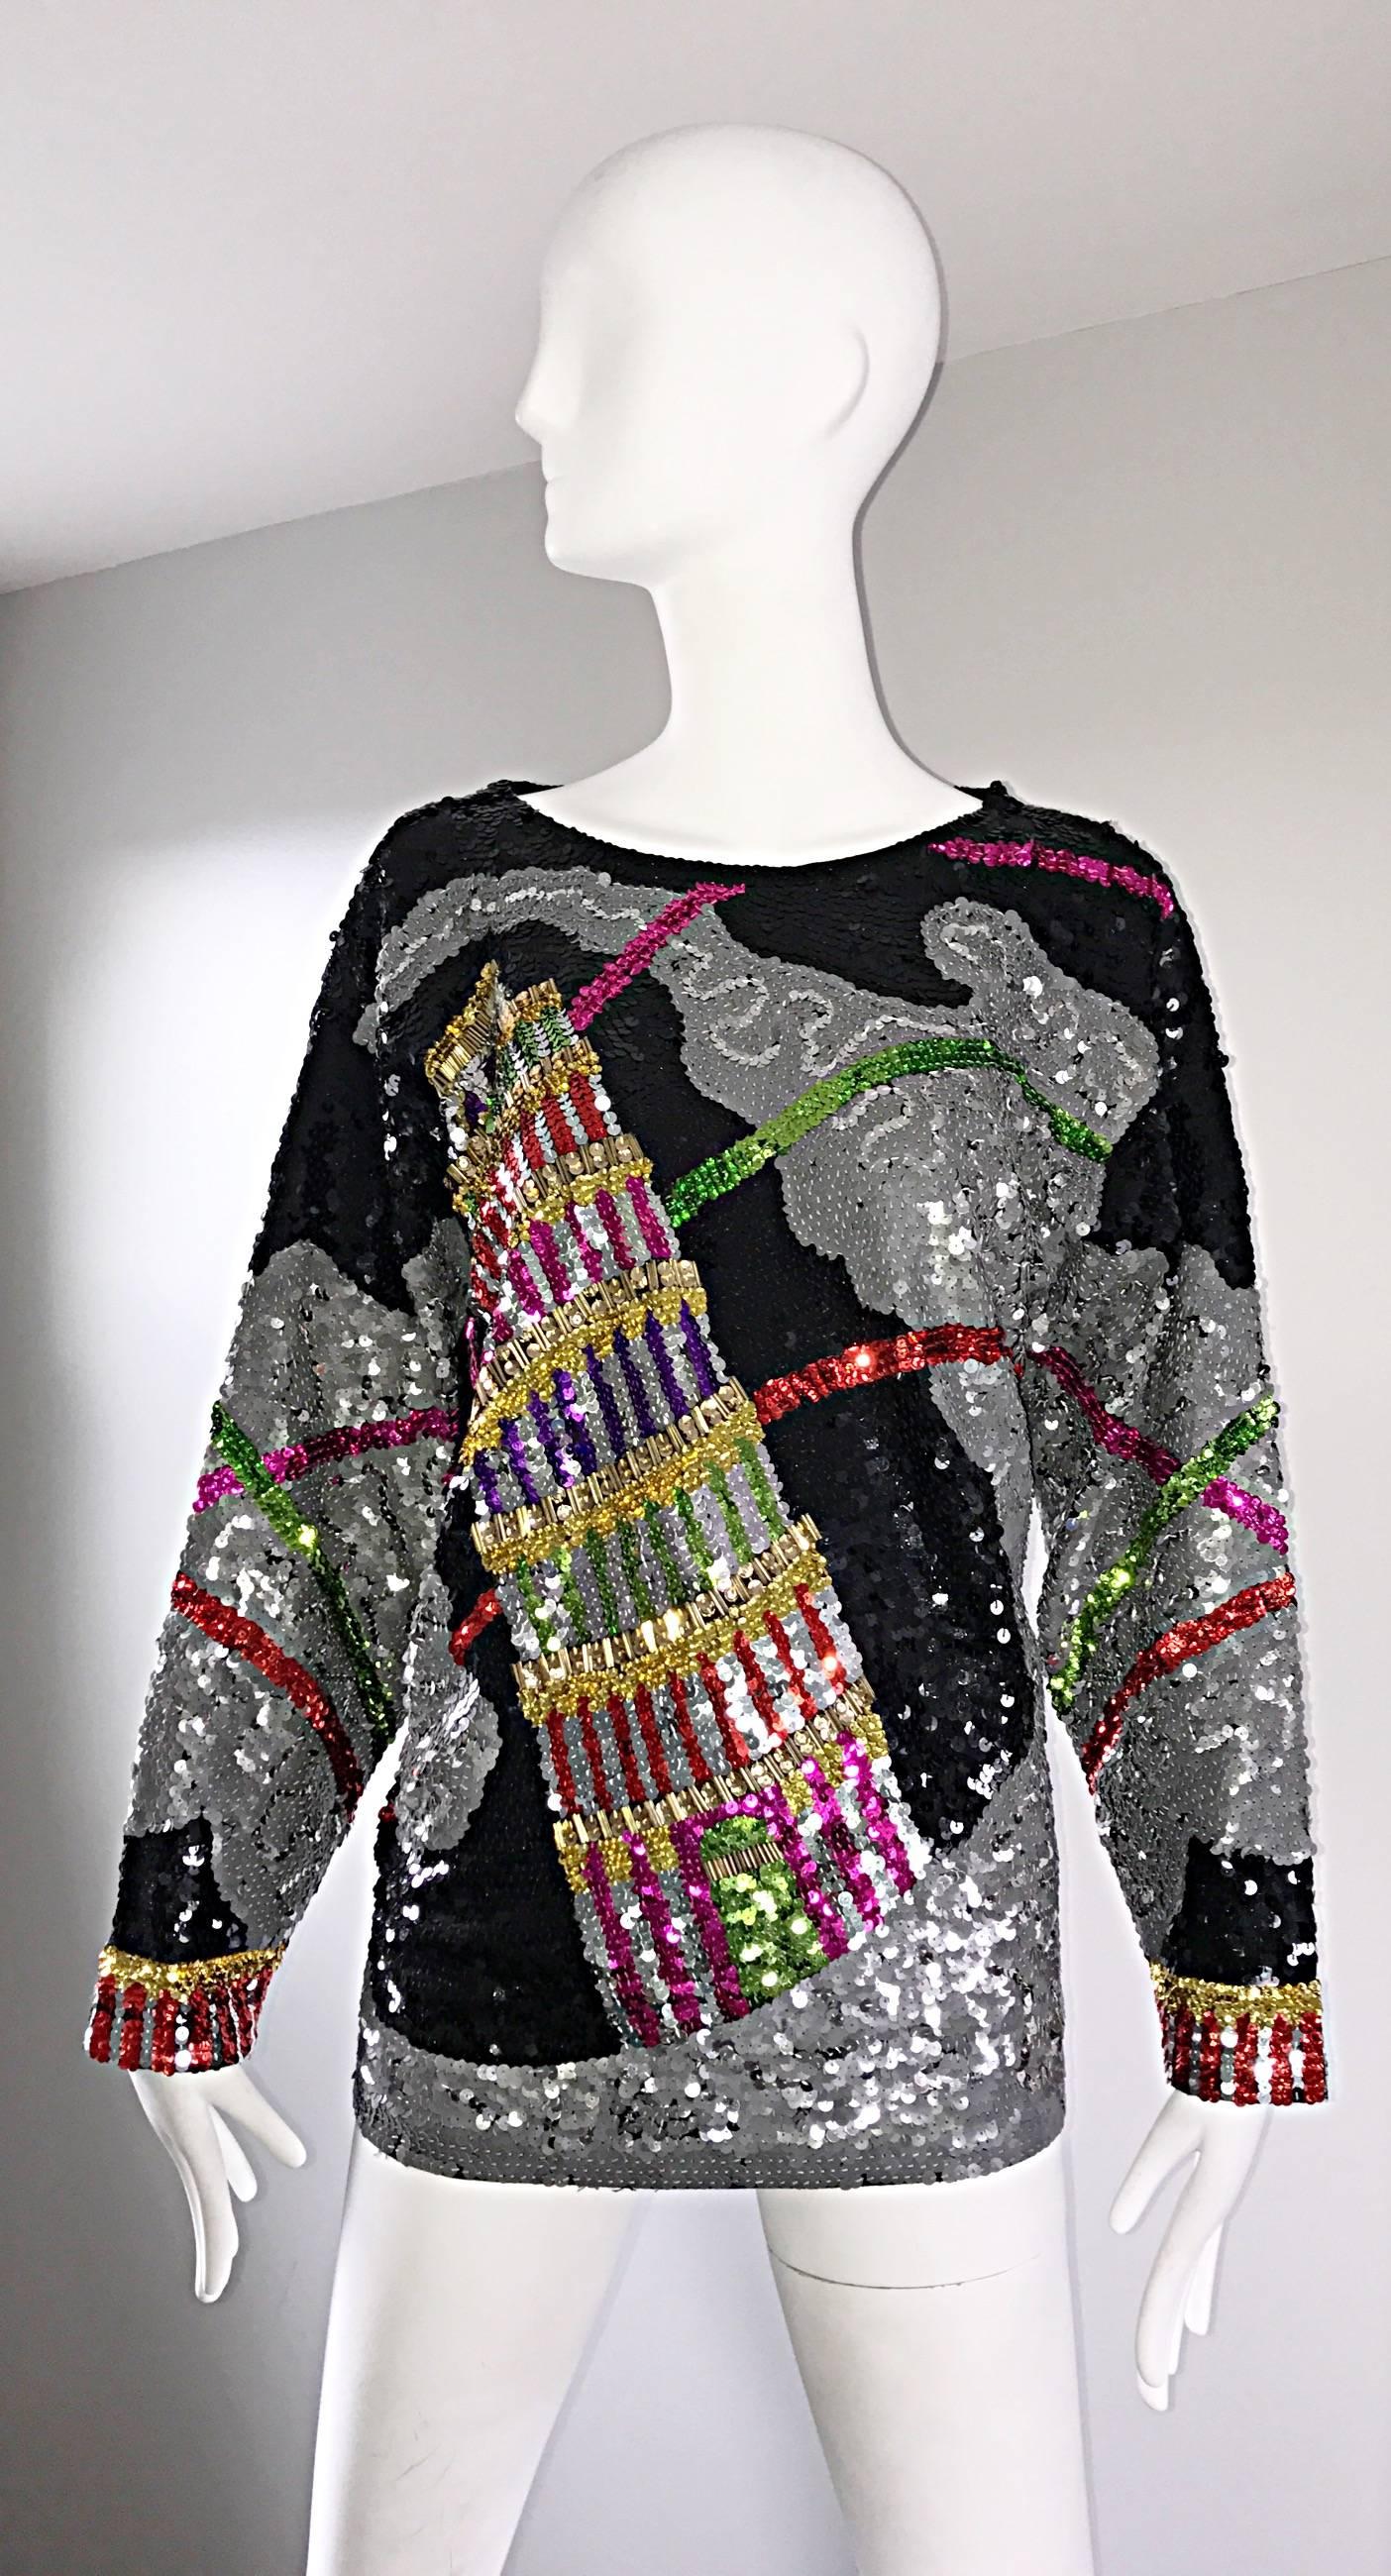 Amazing vintage 'Leaning Tower of Pisa' fully sequined novelty cotton top! Thousands of colorful and black hand-sewn sequins throughout. The perfect statement worthy piece! Single button closure at top back neck. Dolman sleeves and lots of stretch